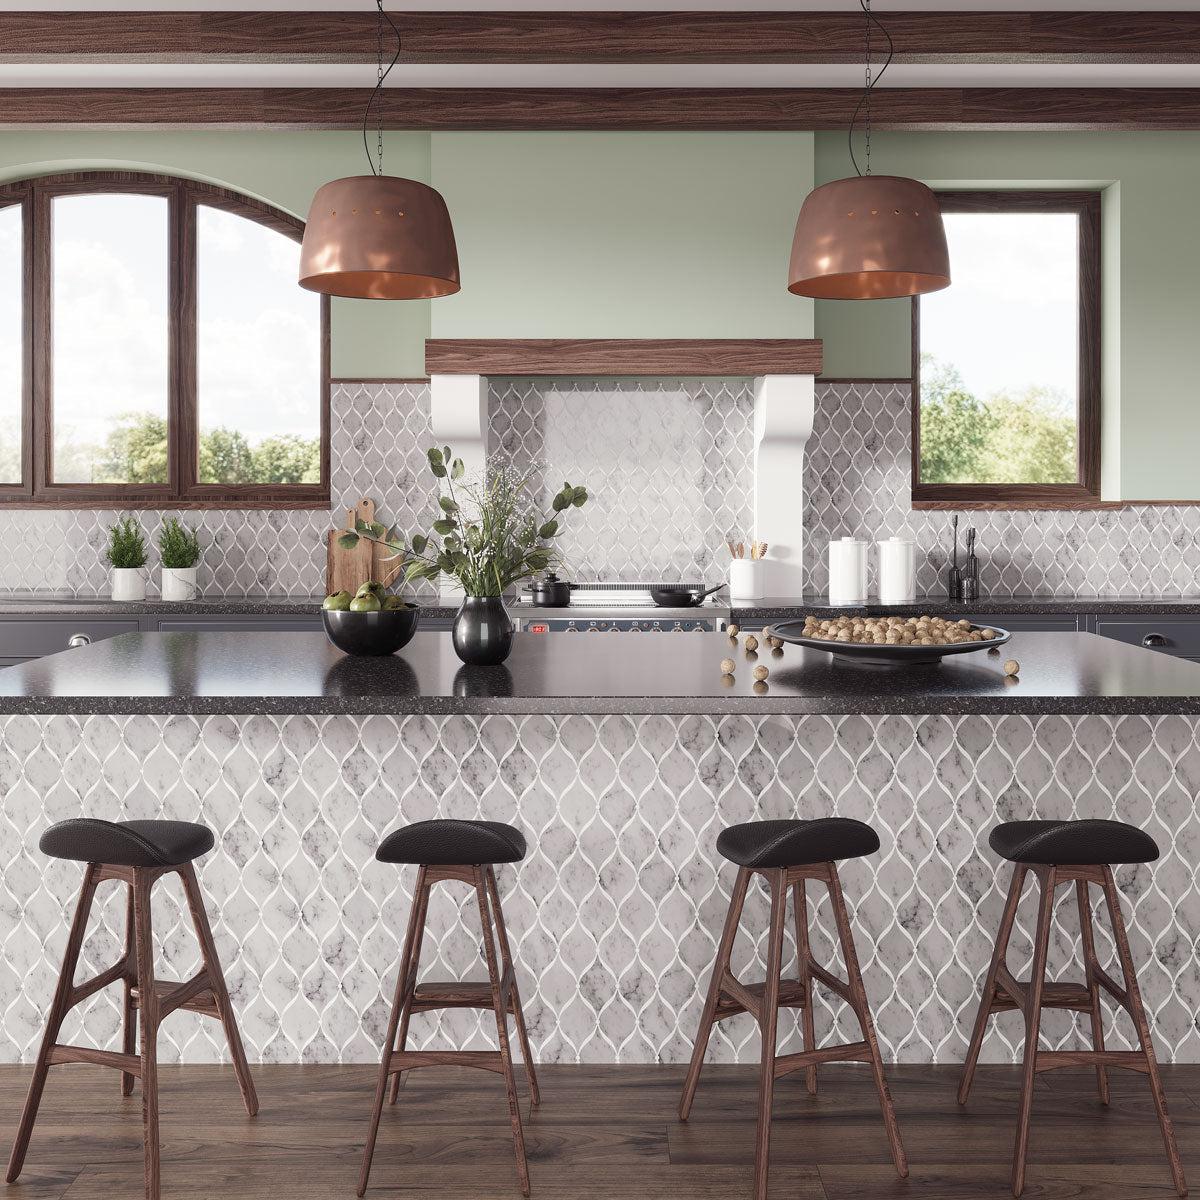 Organic modern kitchen style with gray and white marble lantern tile on the backsplash and island